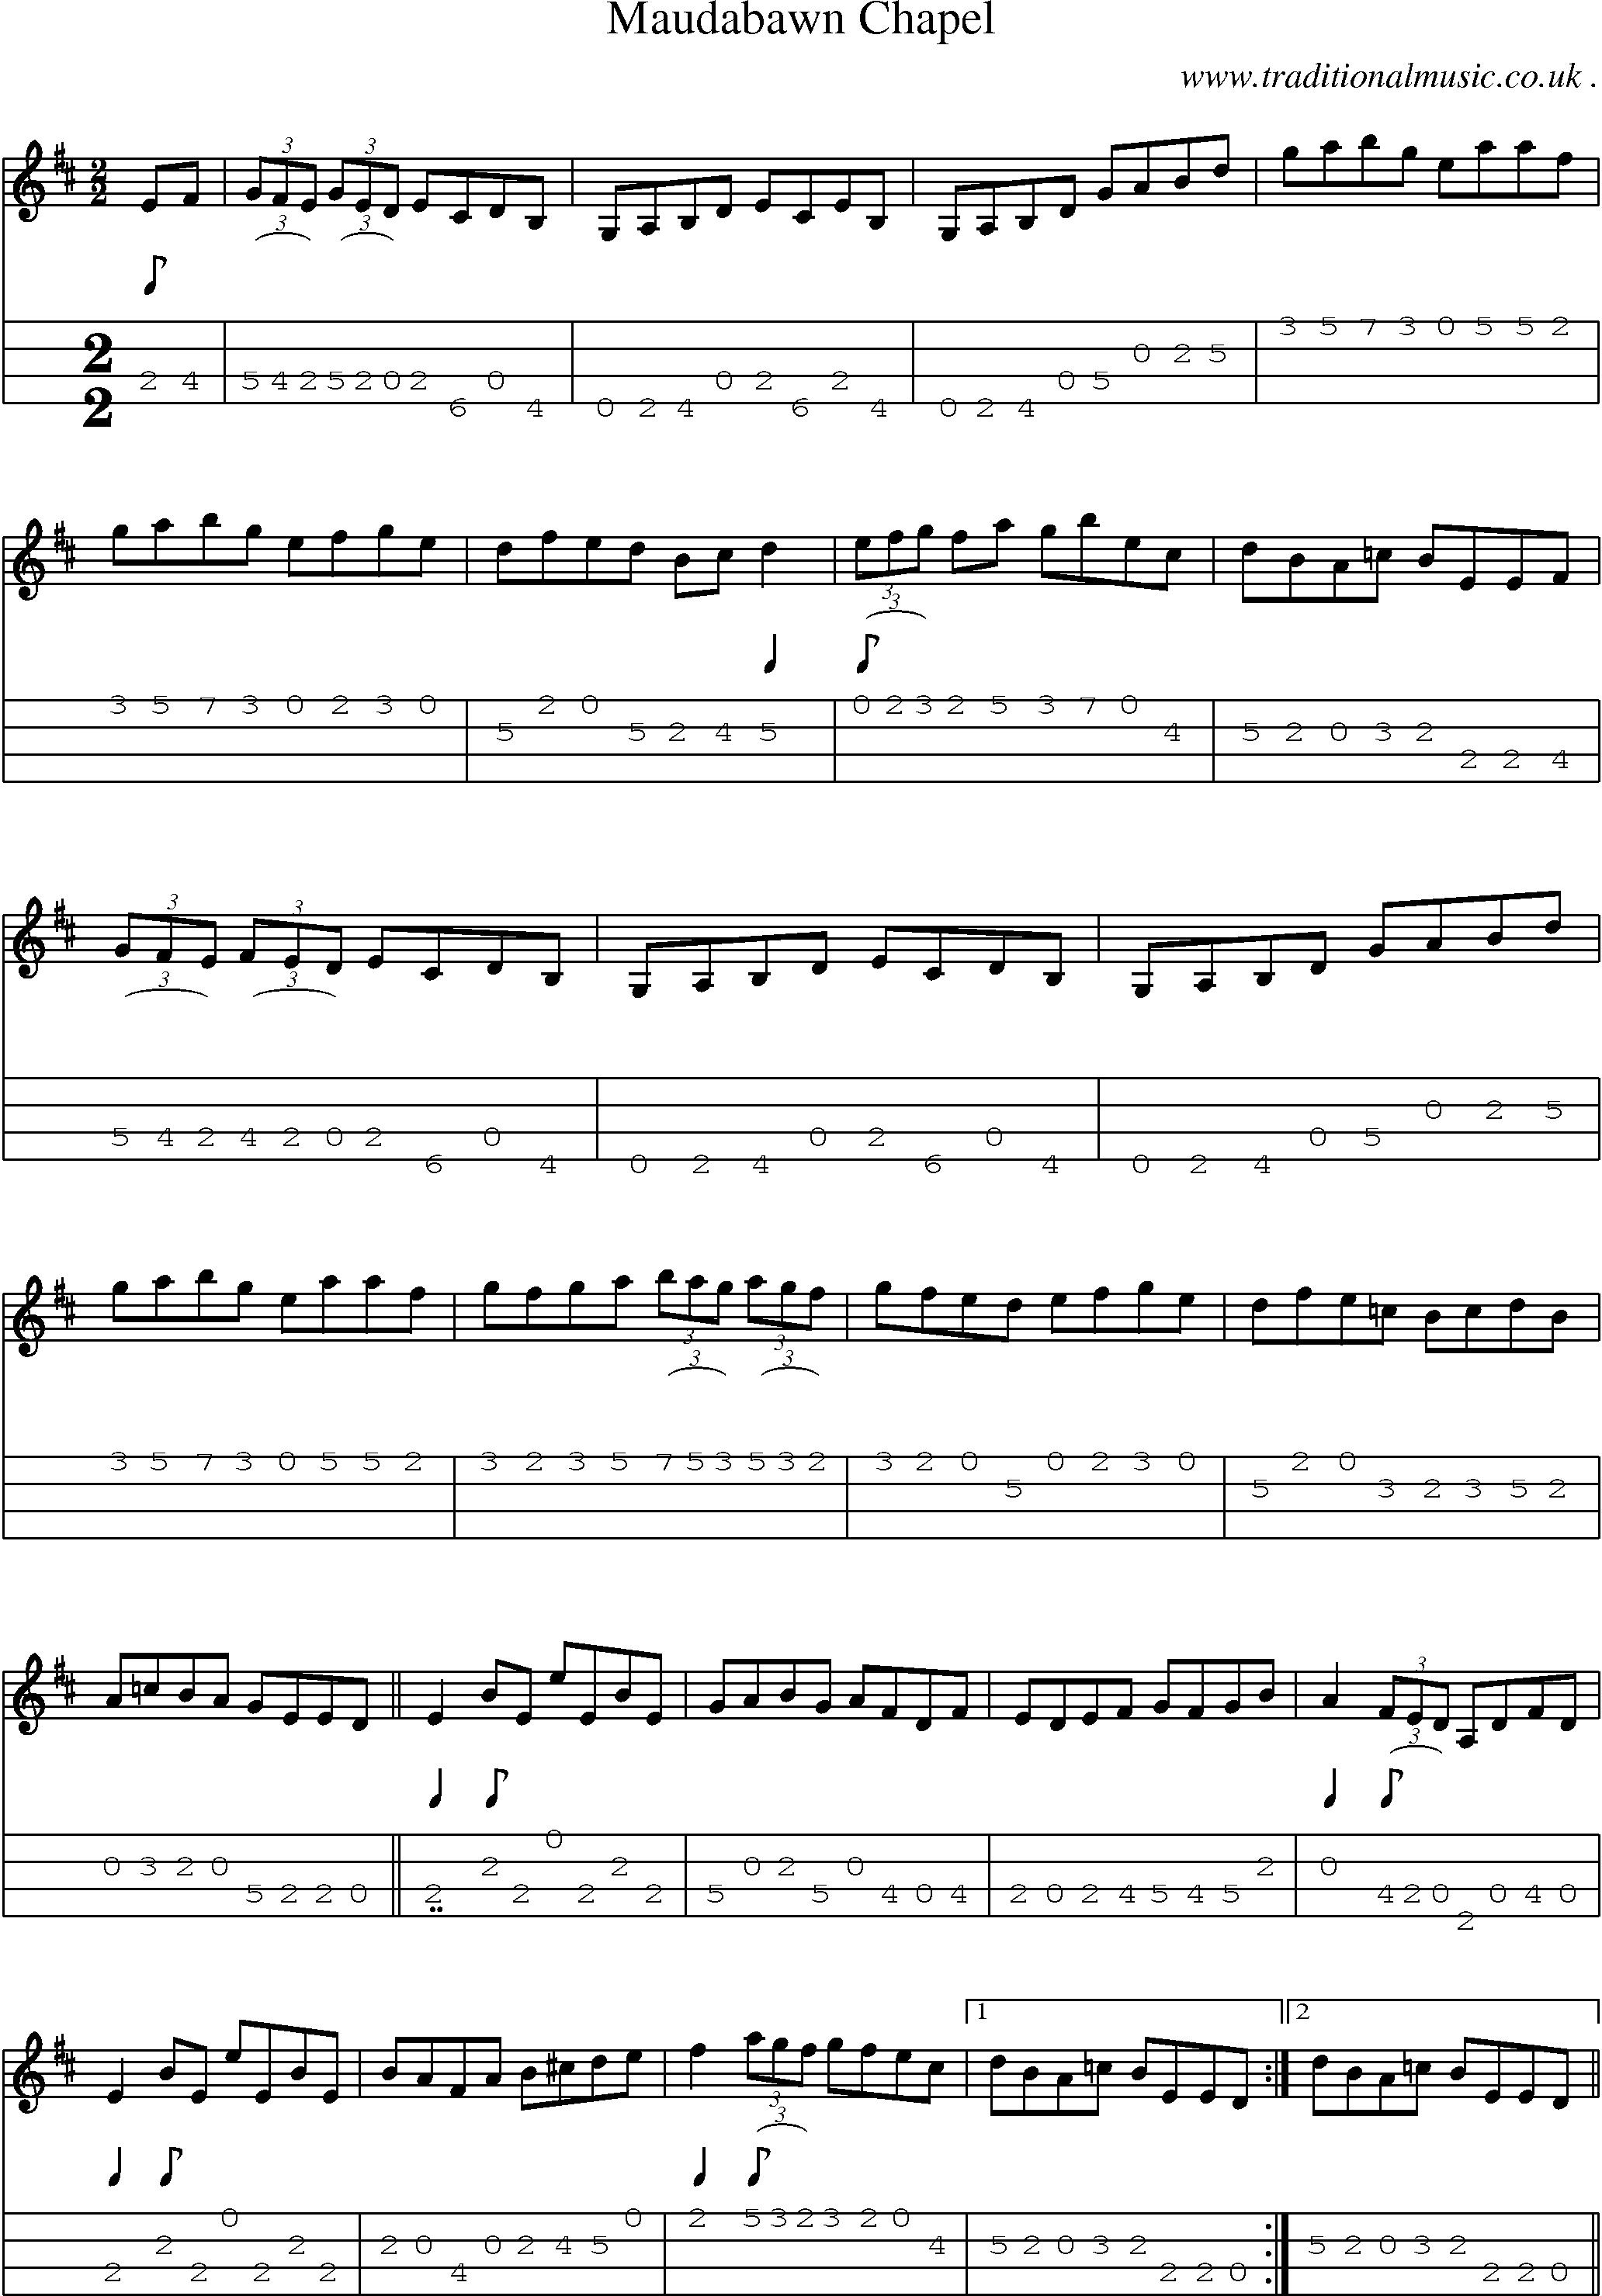 Sheet-Music and Mandolin Tabs for Maudabawn Chapel